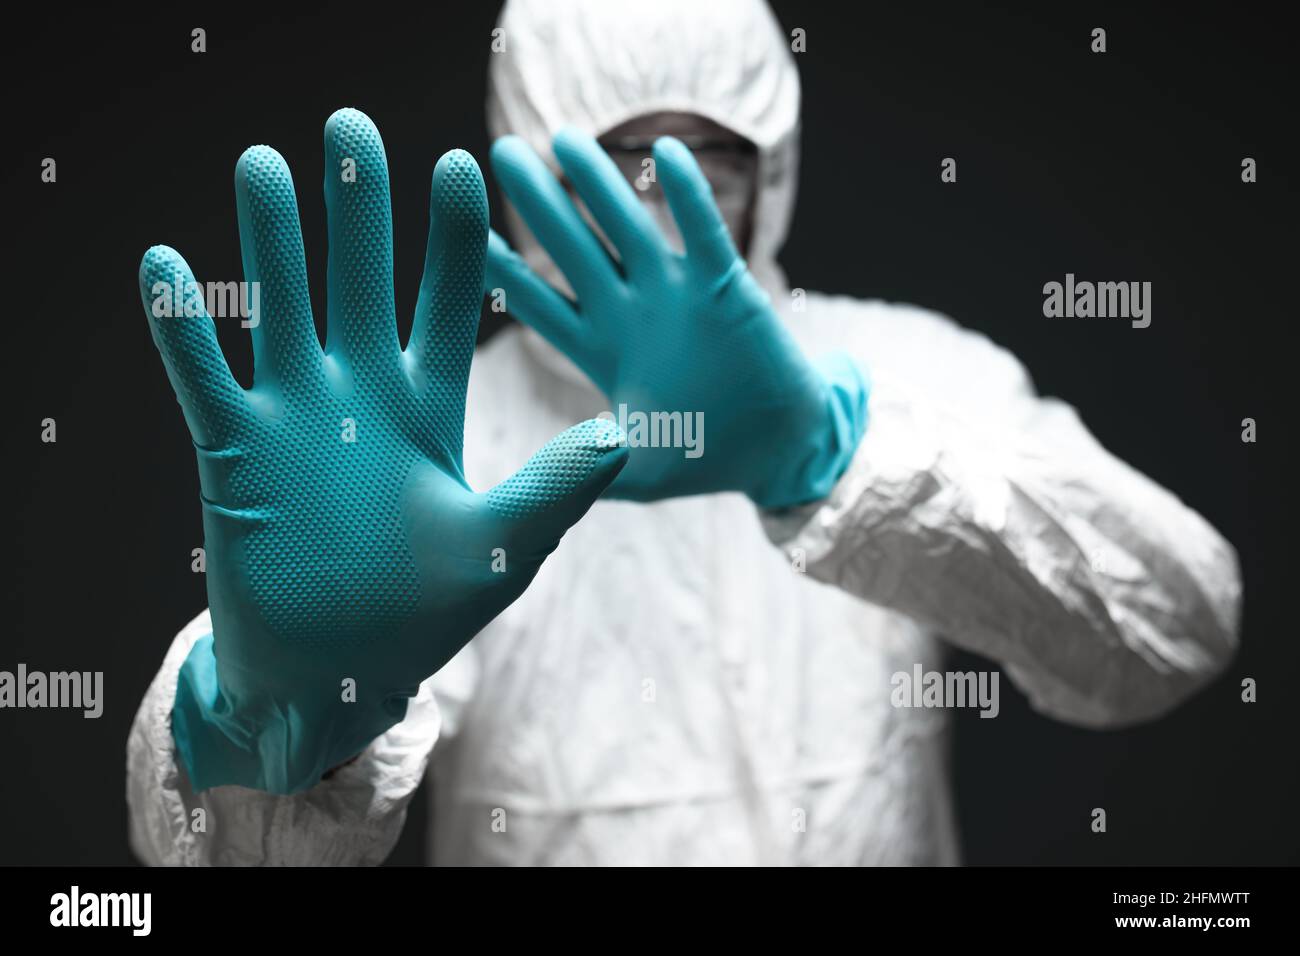 Medical professional dressed in full protective coverall clothing gesturing stop sign with hands in front of covid-19 red zone, selective focus Stock Photo